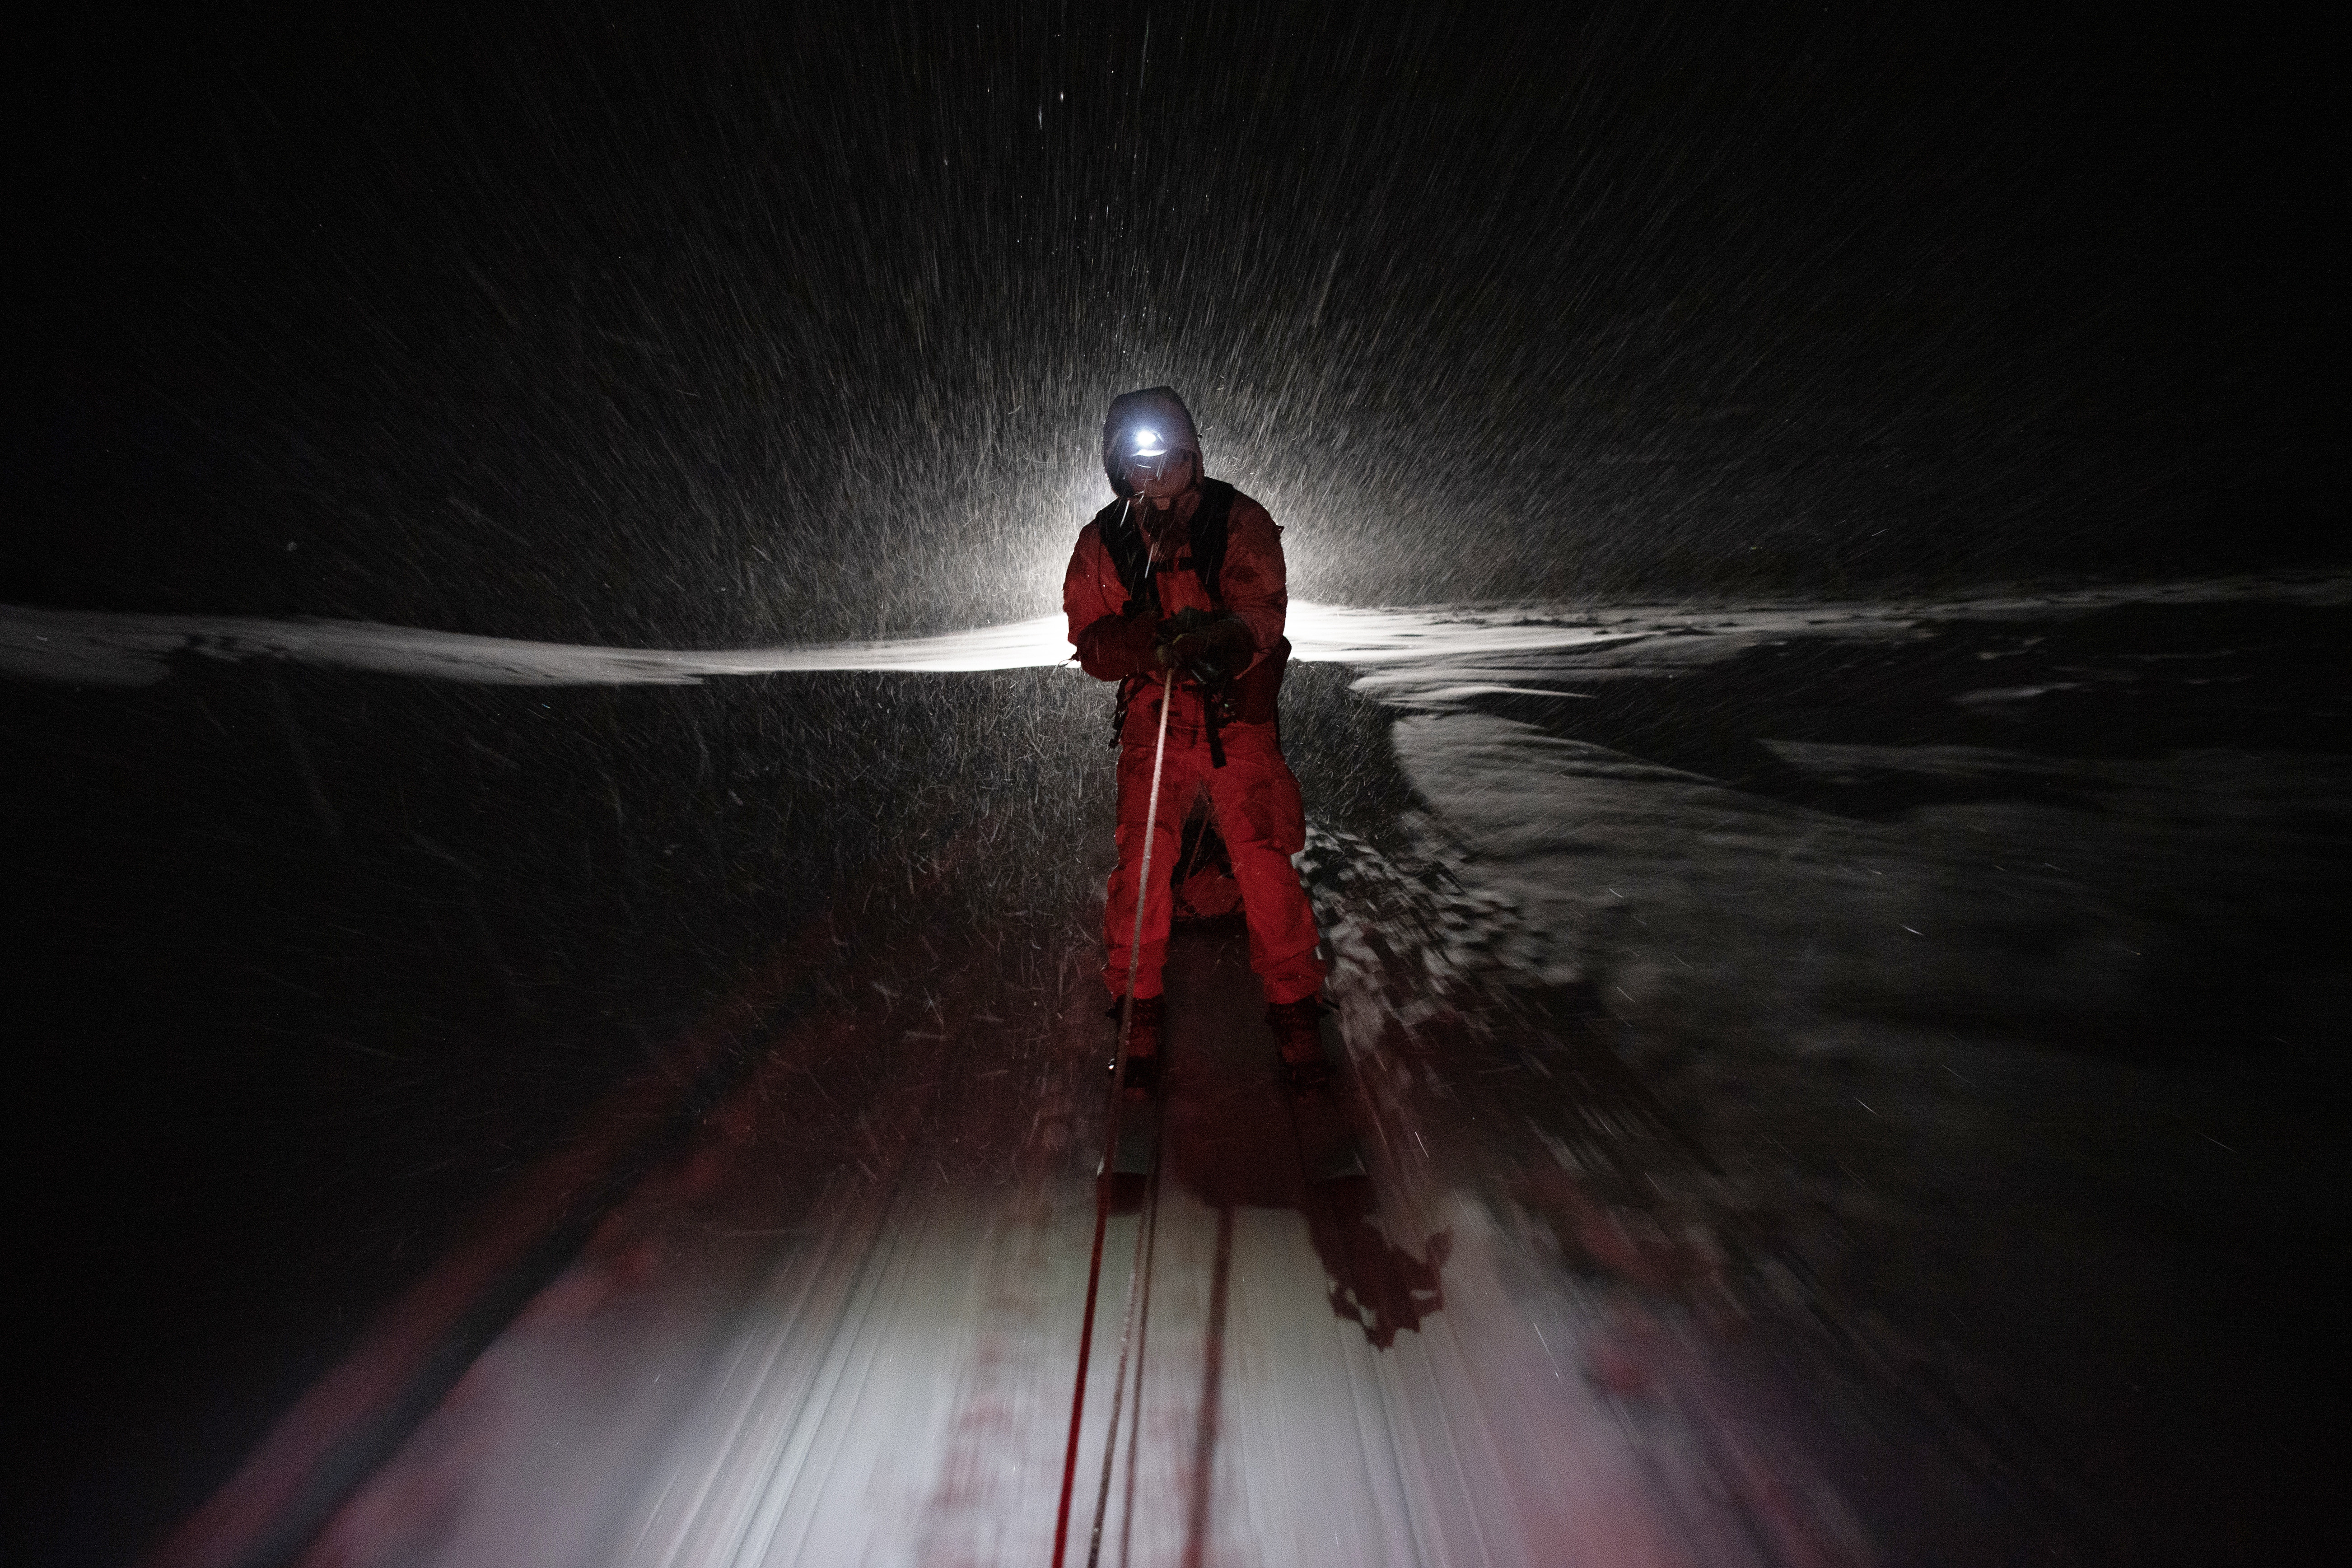 Air Force Capt. Travis Hunt is pulled by a snow machine while skijoring along the Denali Highway, Alaska